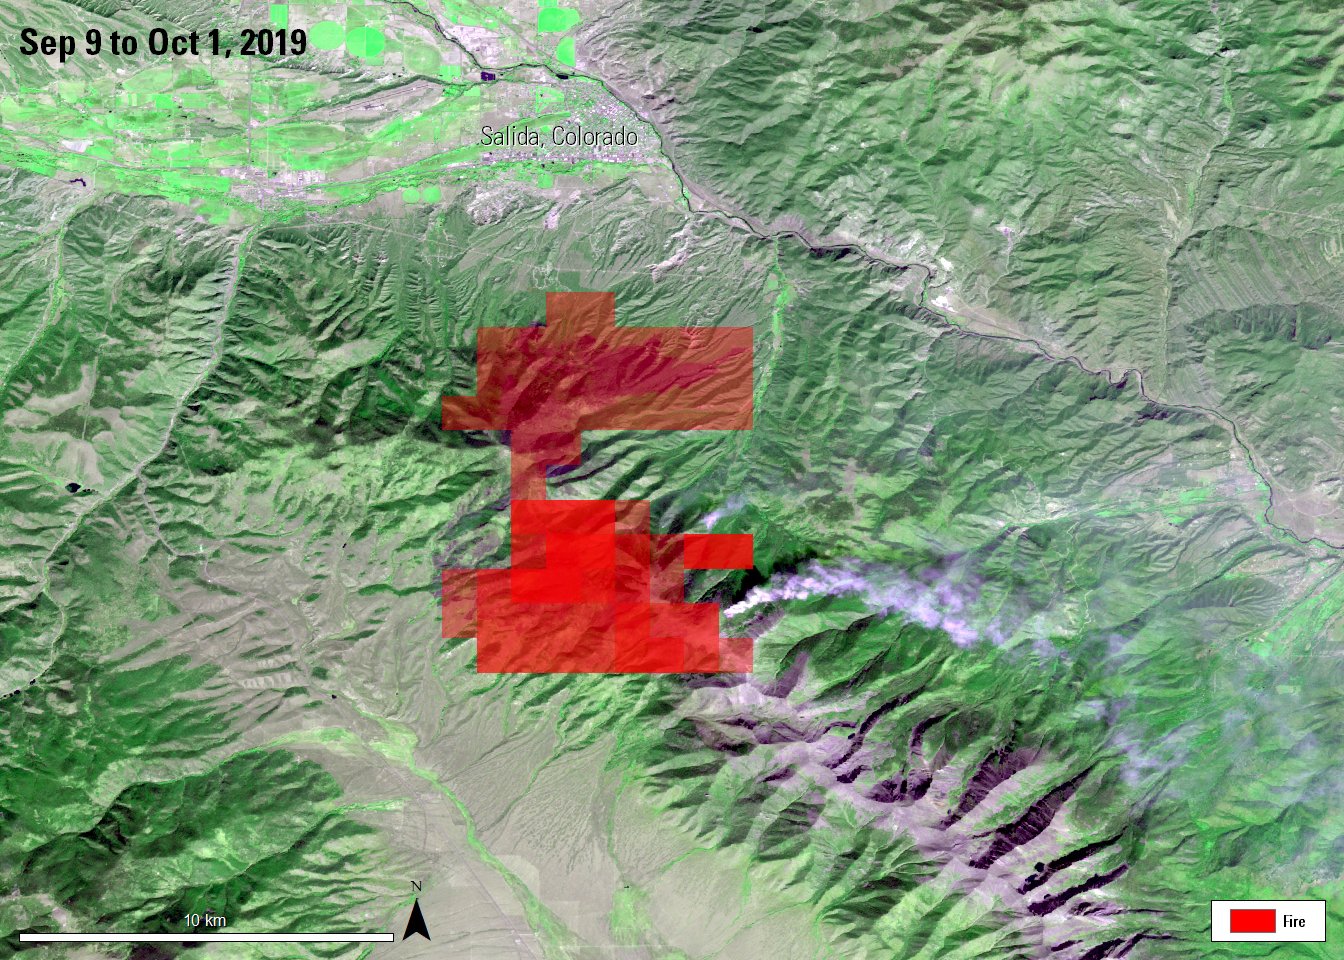 VNP14 products from Sep 9 to Oct 1, 2019 overlaid on AST_L1T image of Decker Fire near Salida, Colorado, acquired on October 12, 2019.